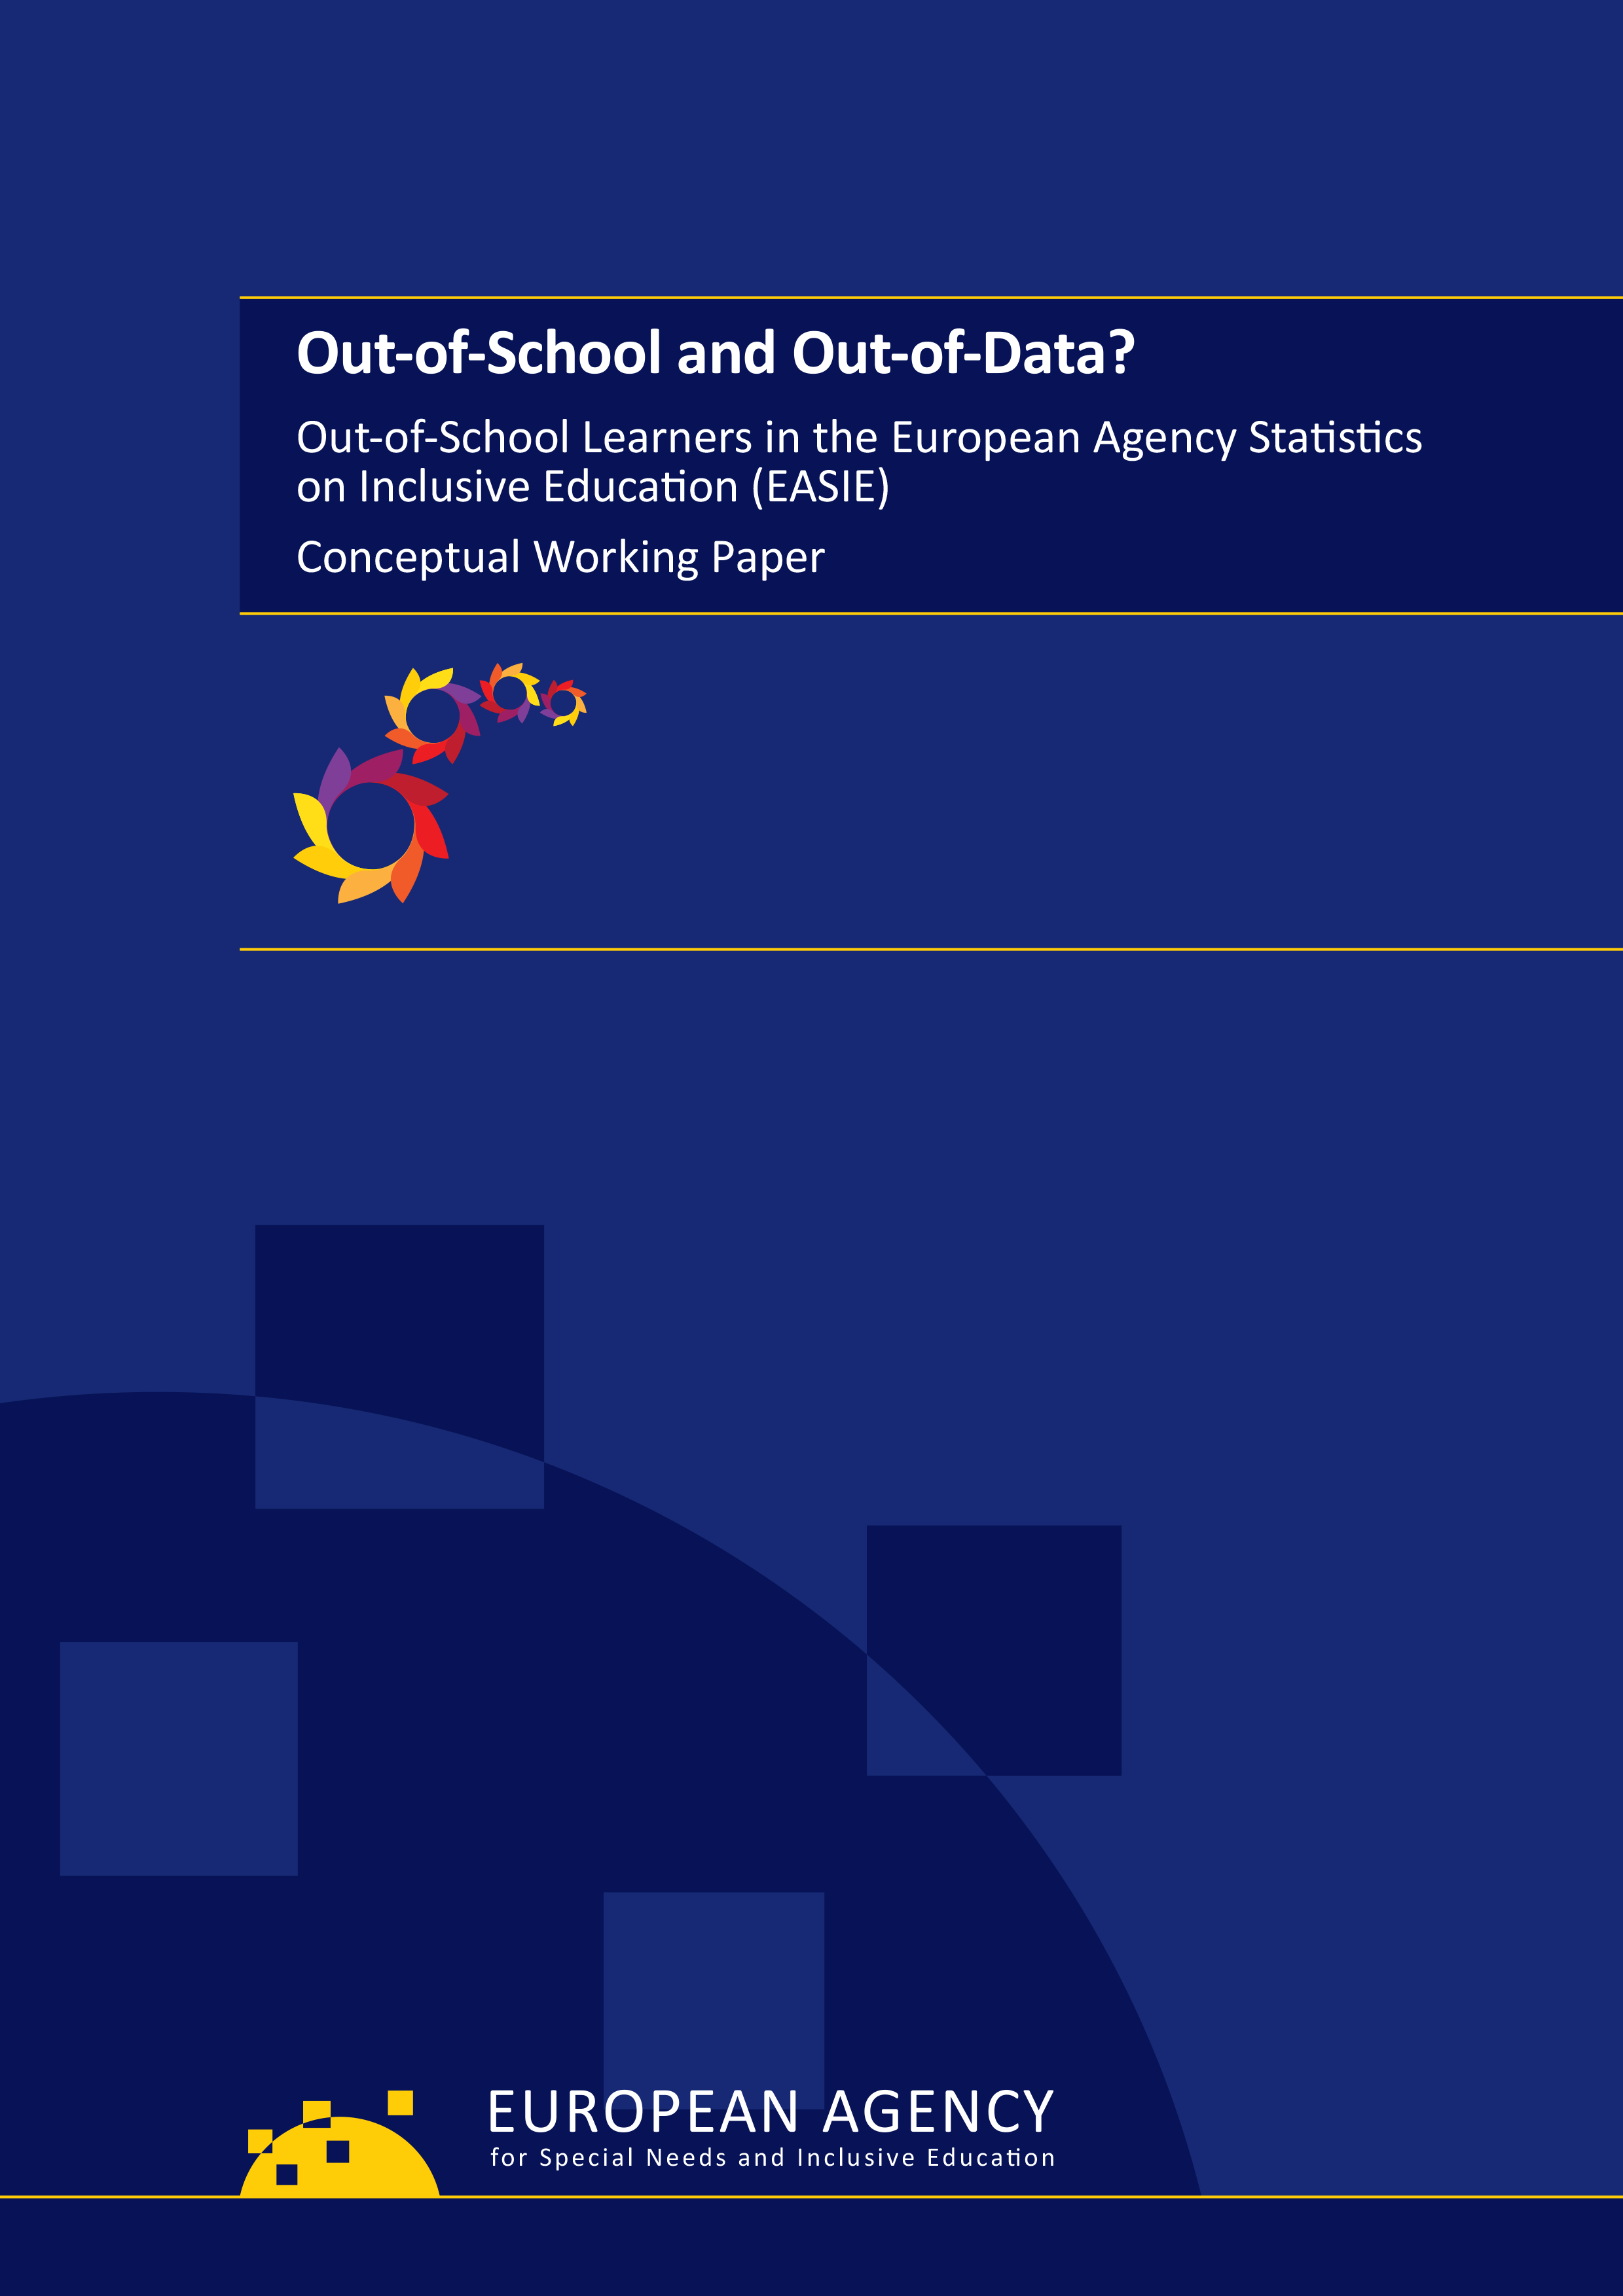 Out-of-School and Out-of-Data? Out-of-School Learners in EASIE – Conceptual Working Paper